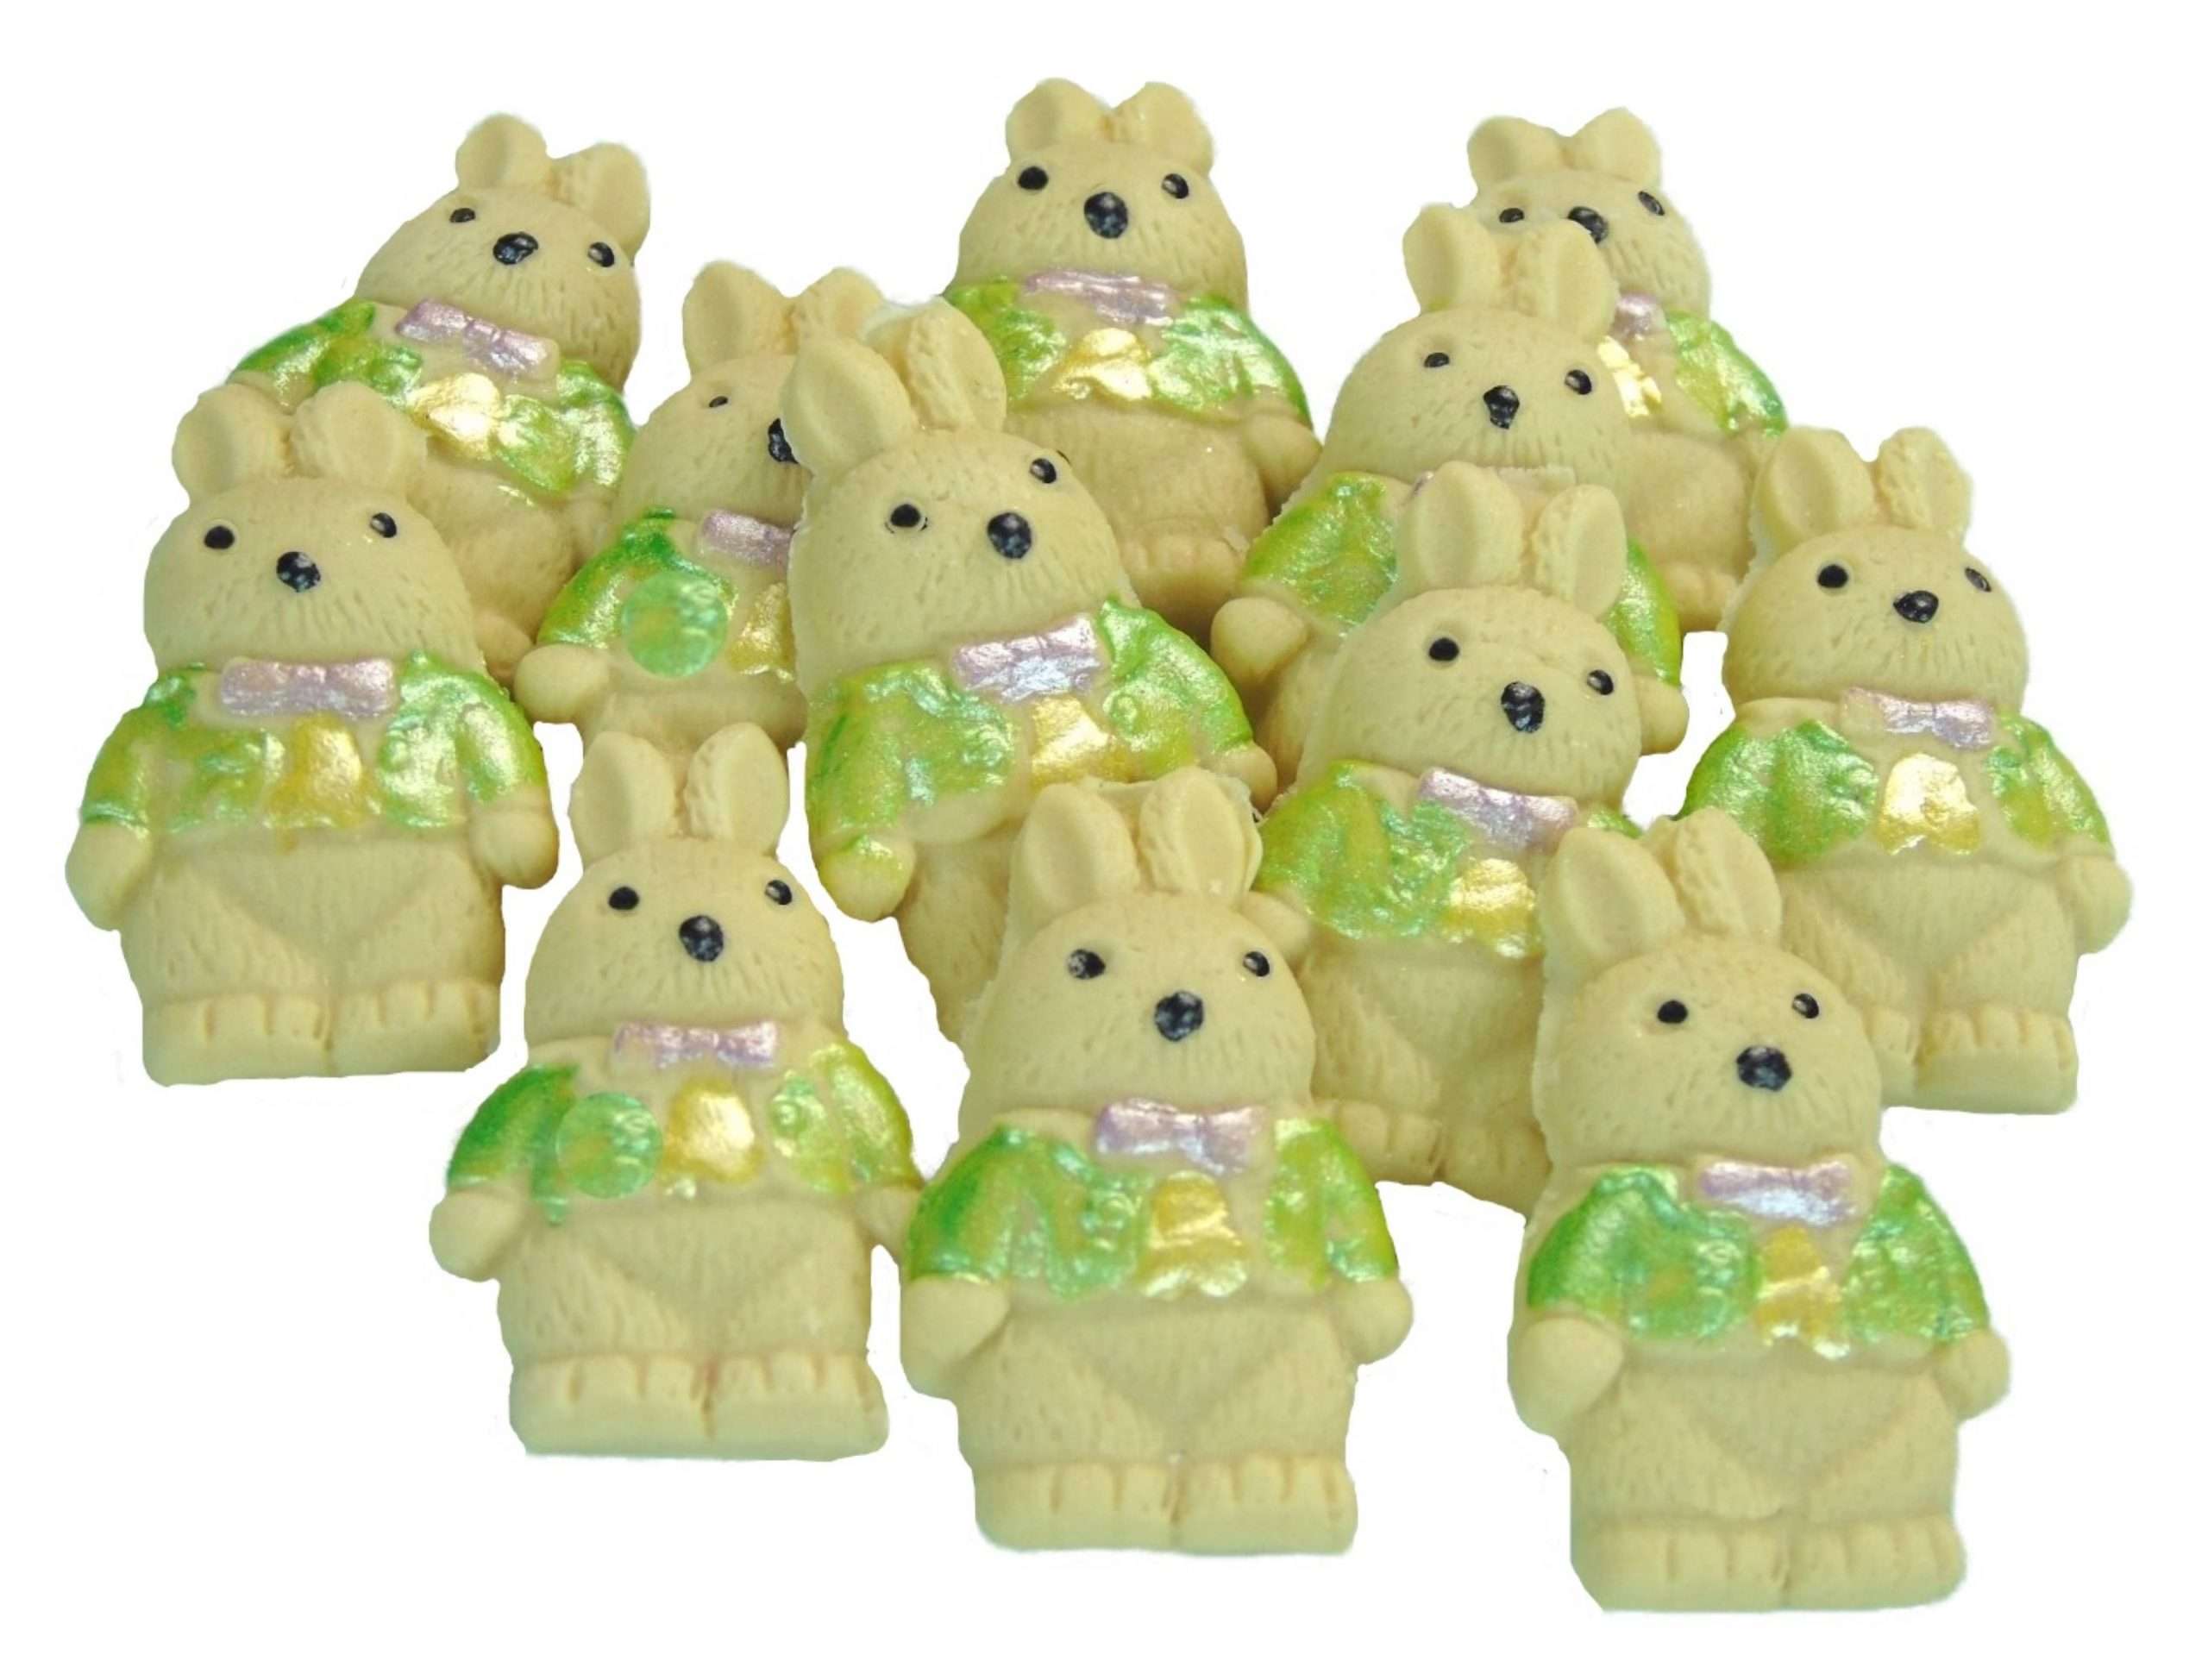 Inkedcream rabbits1 LI scaled If you are looking for something for your baby shower, birthday or Easter bakes? Then these edible rabbits are ideal. These are available in two colours, cream and brown. 2 cute Edible Baby Rabbits. These are great for birthdays, Easter and baby showers. Approx Size: 3.5cm tall